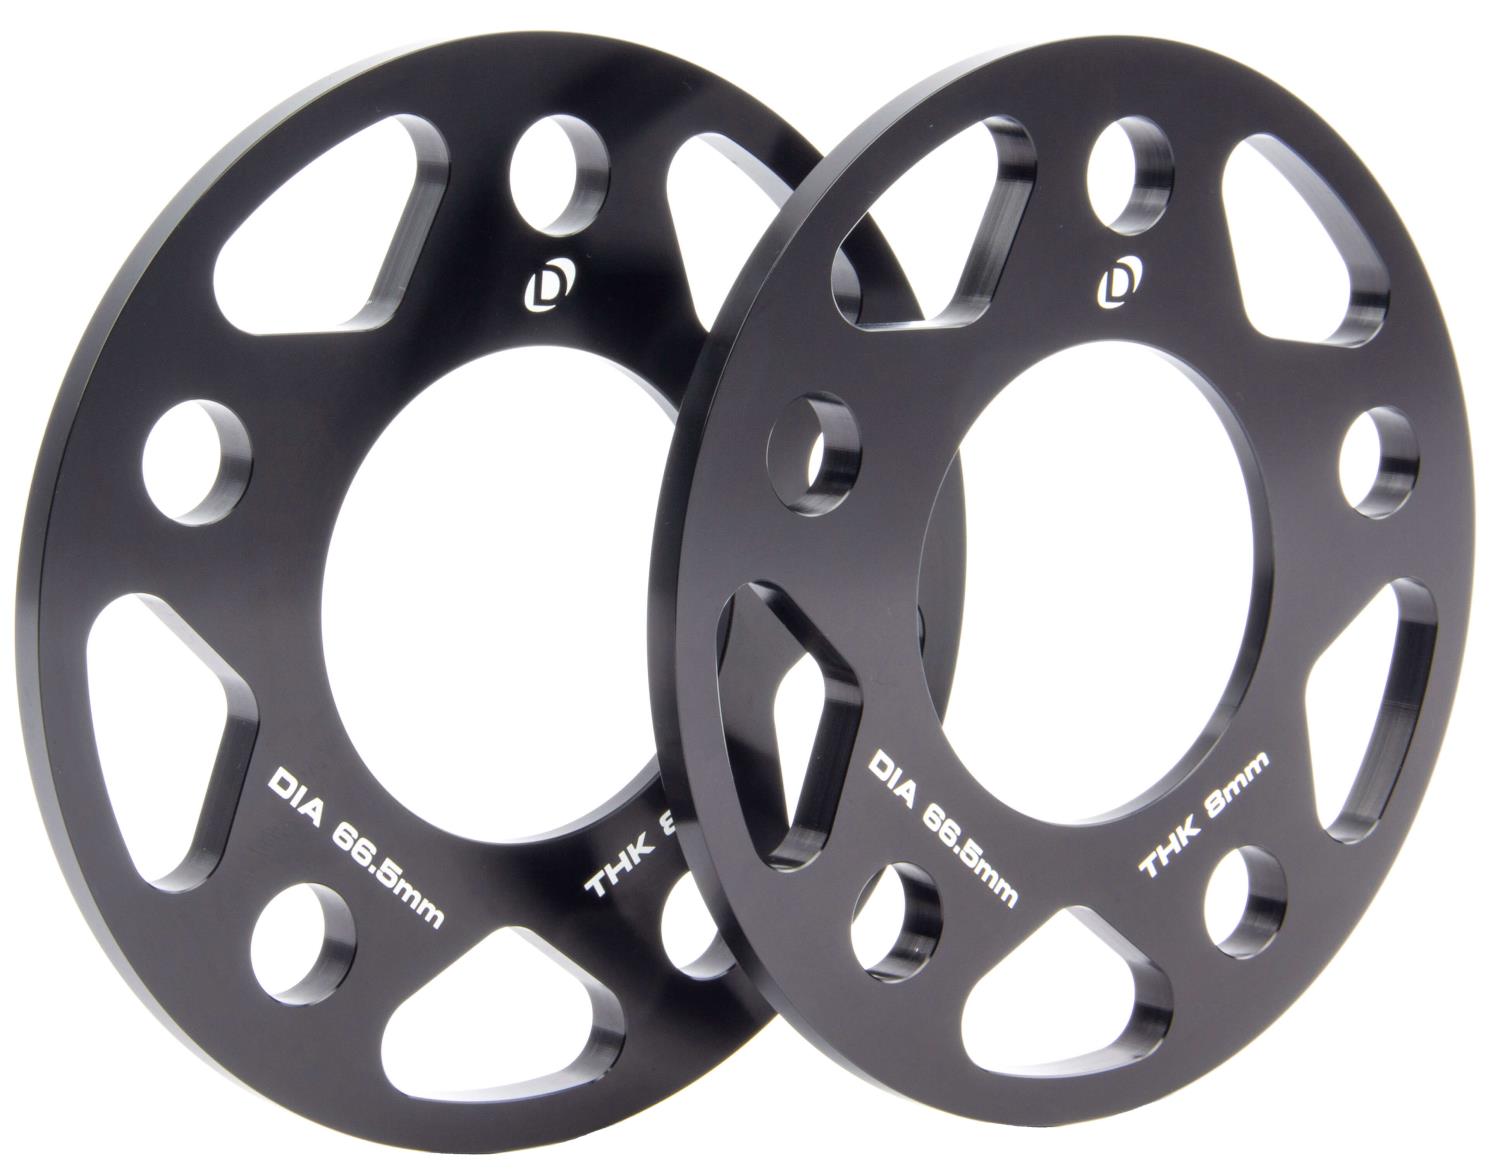 Machined Aluminum Wheel Spacers [8 mm Thick] for Select Late-Model BMW Cars/SUVs, Mini Cooper, Toyota GR Supra  [Black]